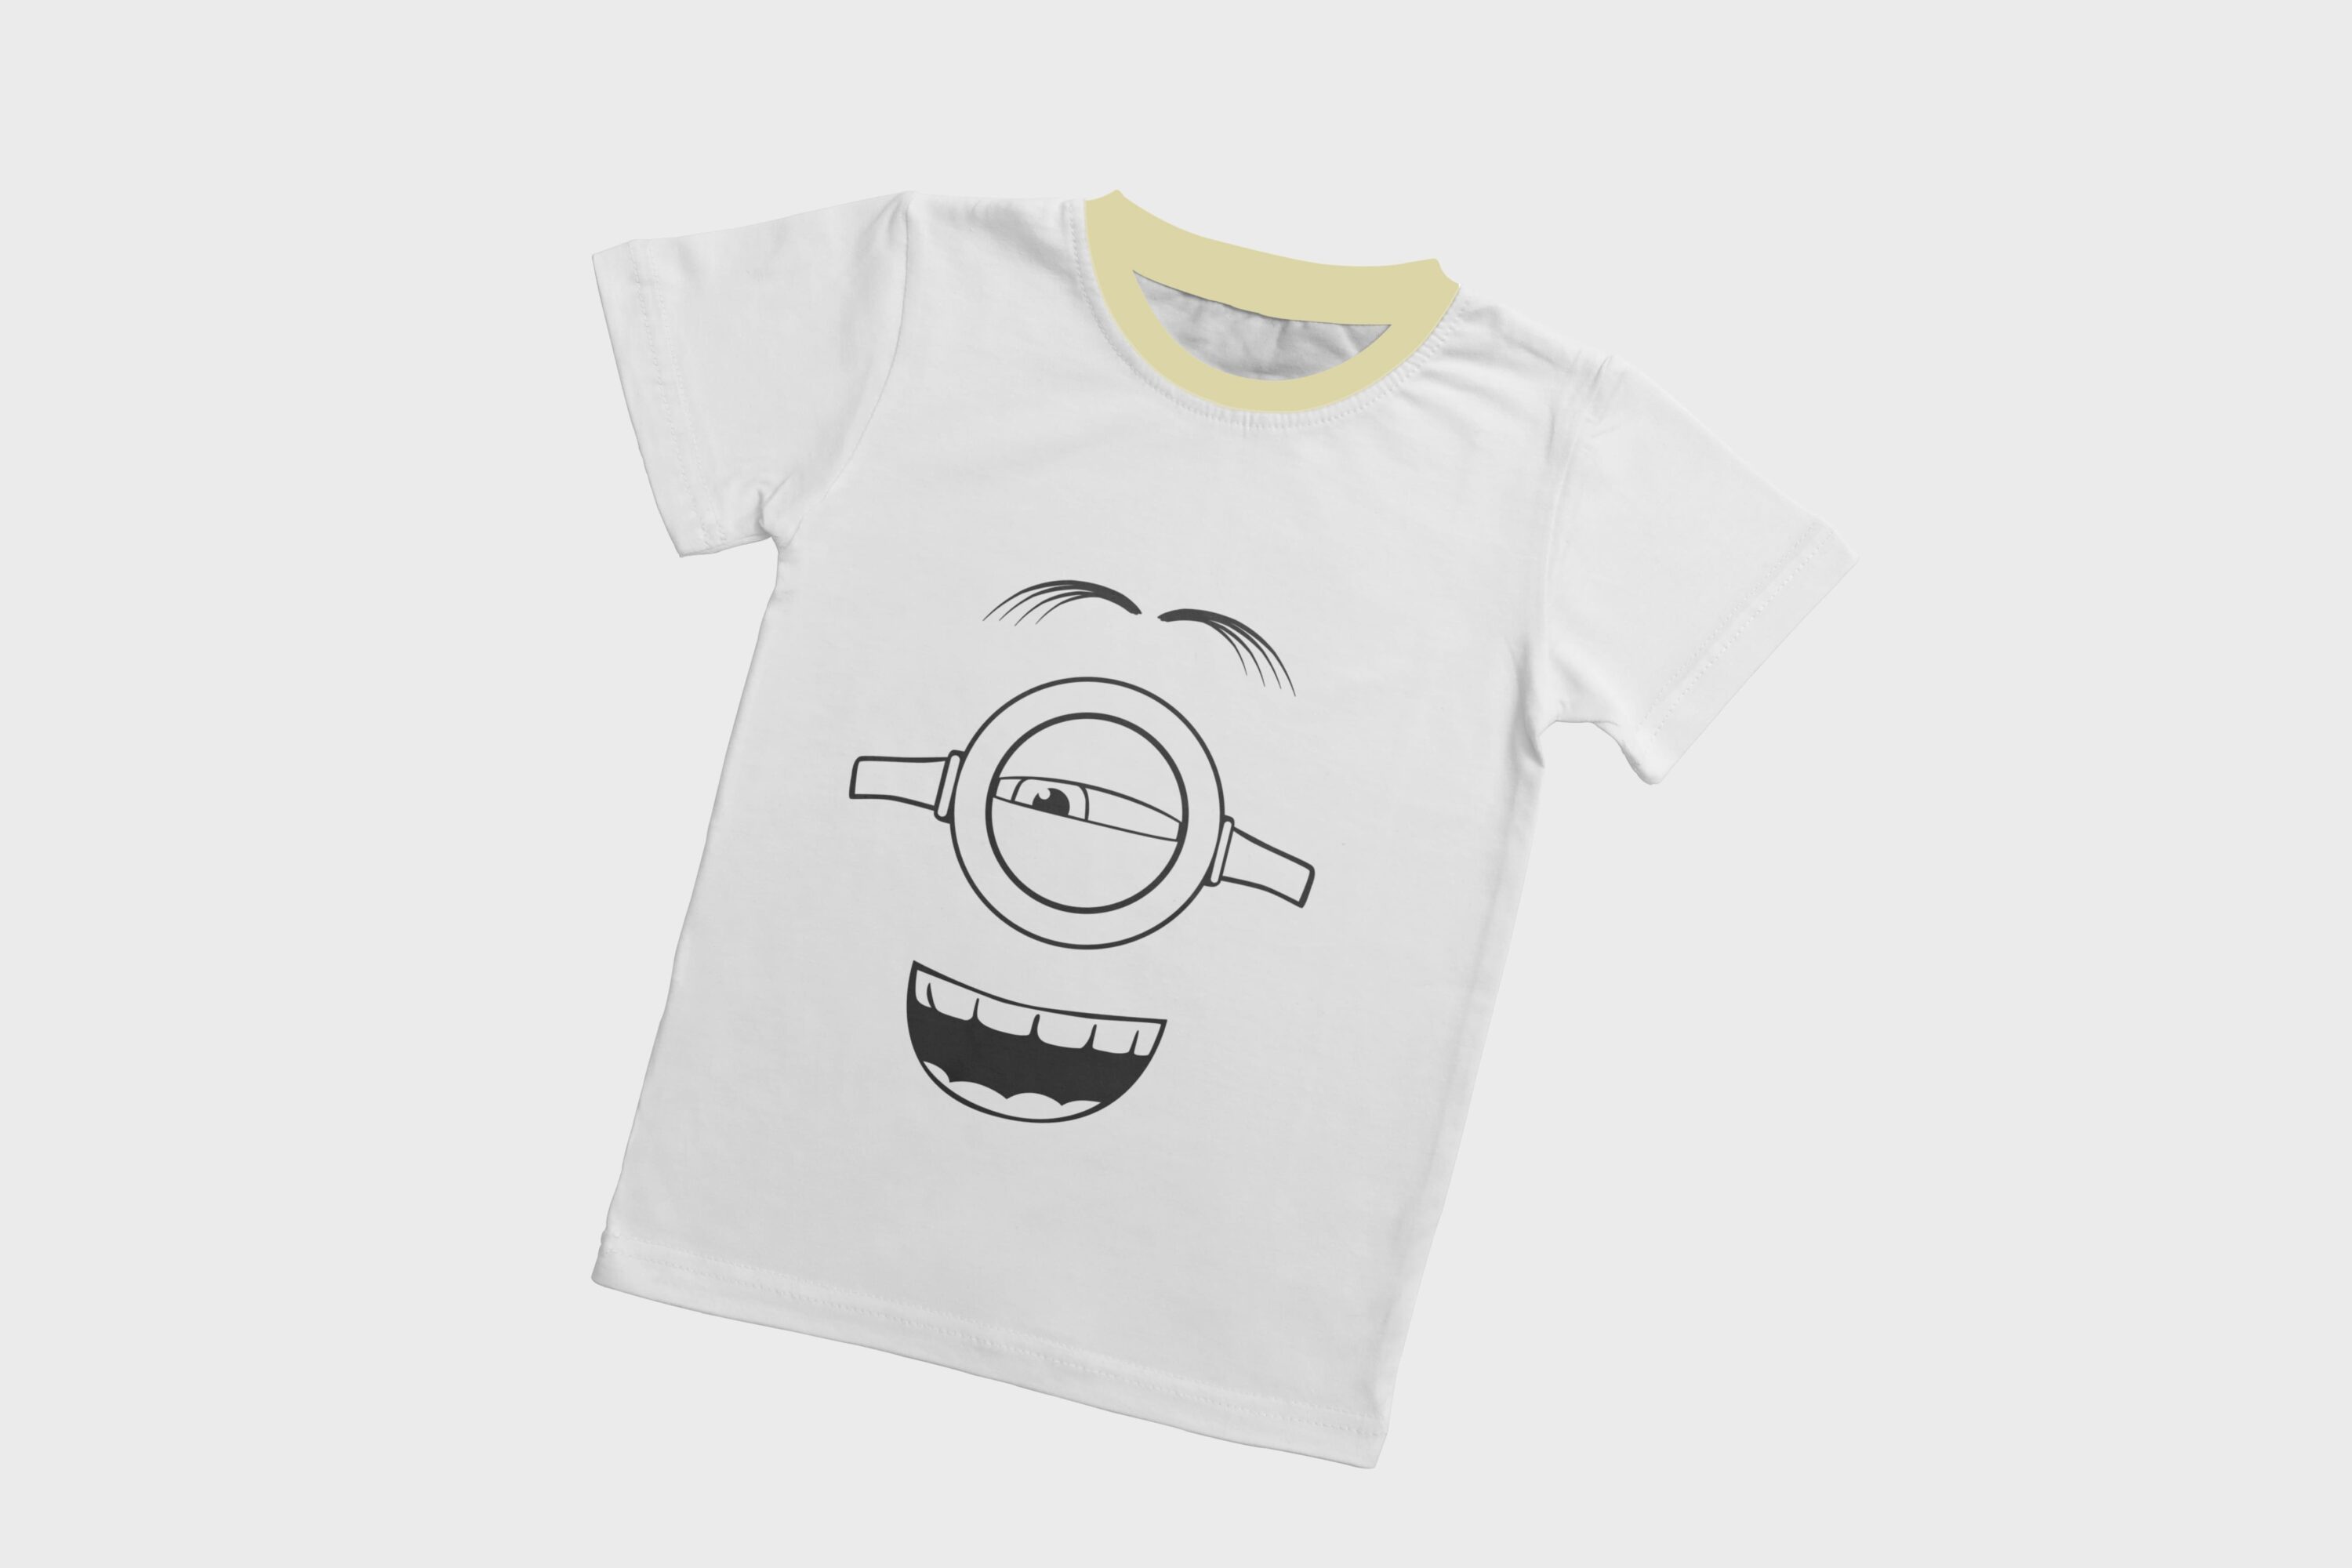 A white T-shirt with a dirty yellow collar and a silhouette face of a laughing minion with one eye.